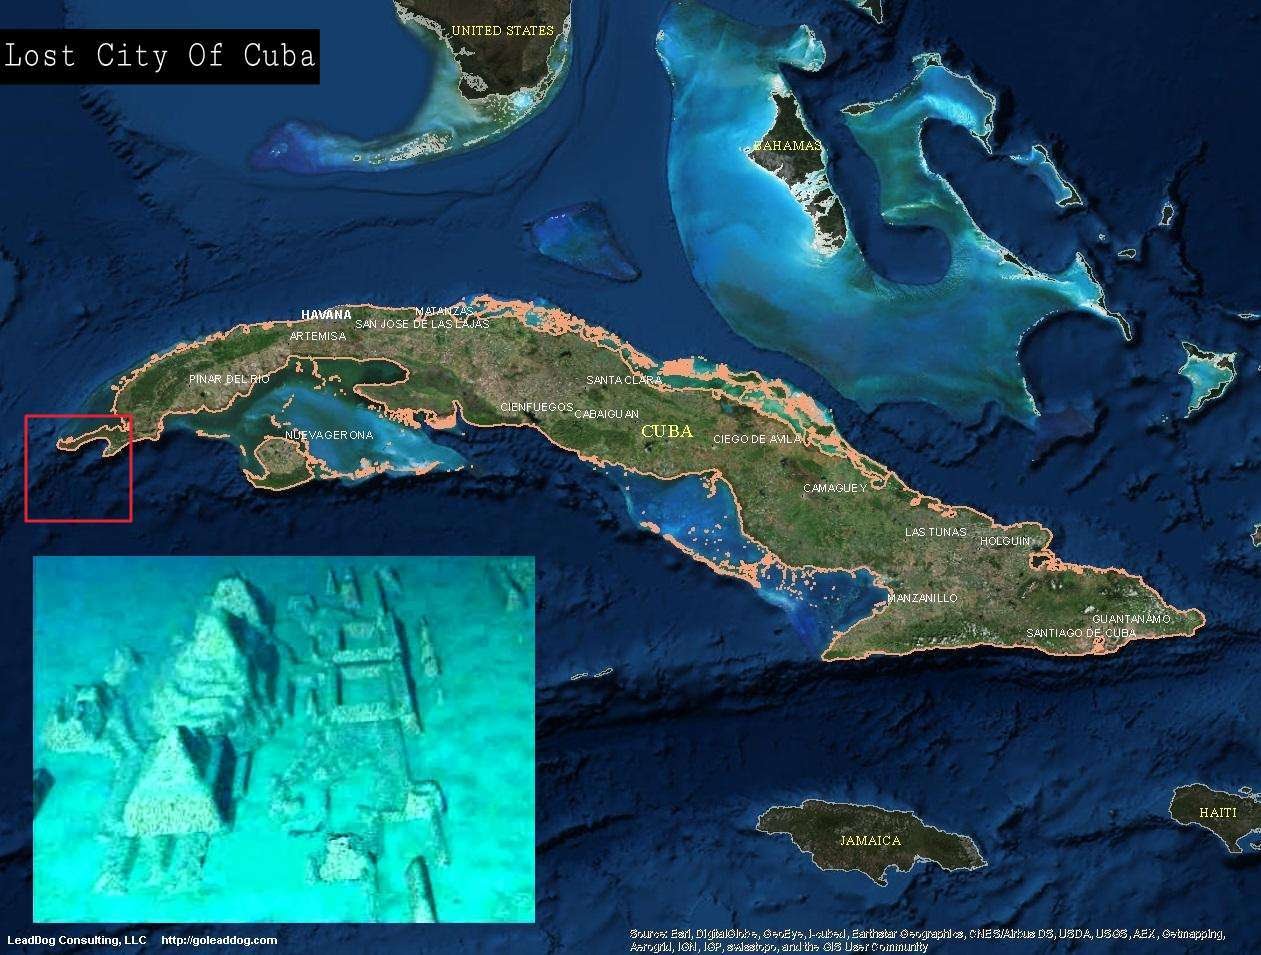 The underwater city of Cuba – is this the lost city of Atlantis? 3